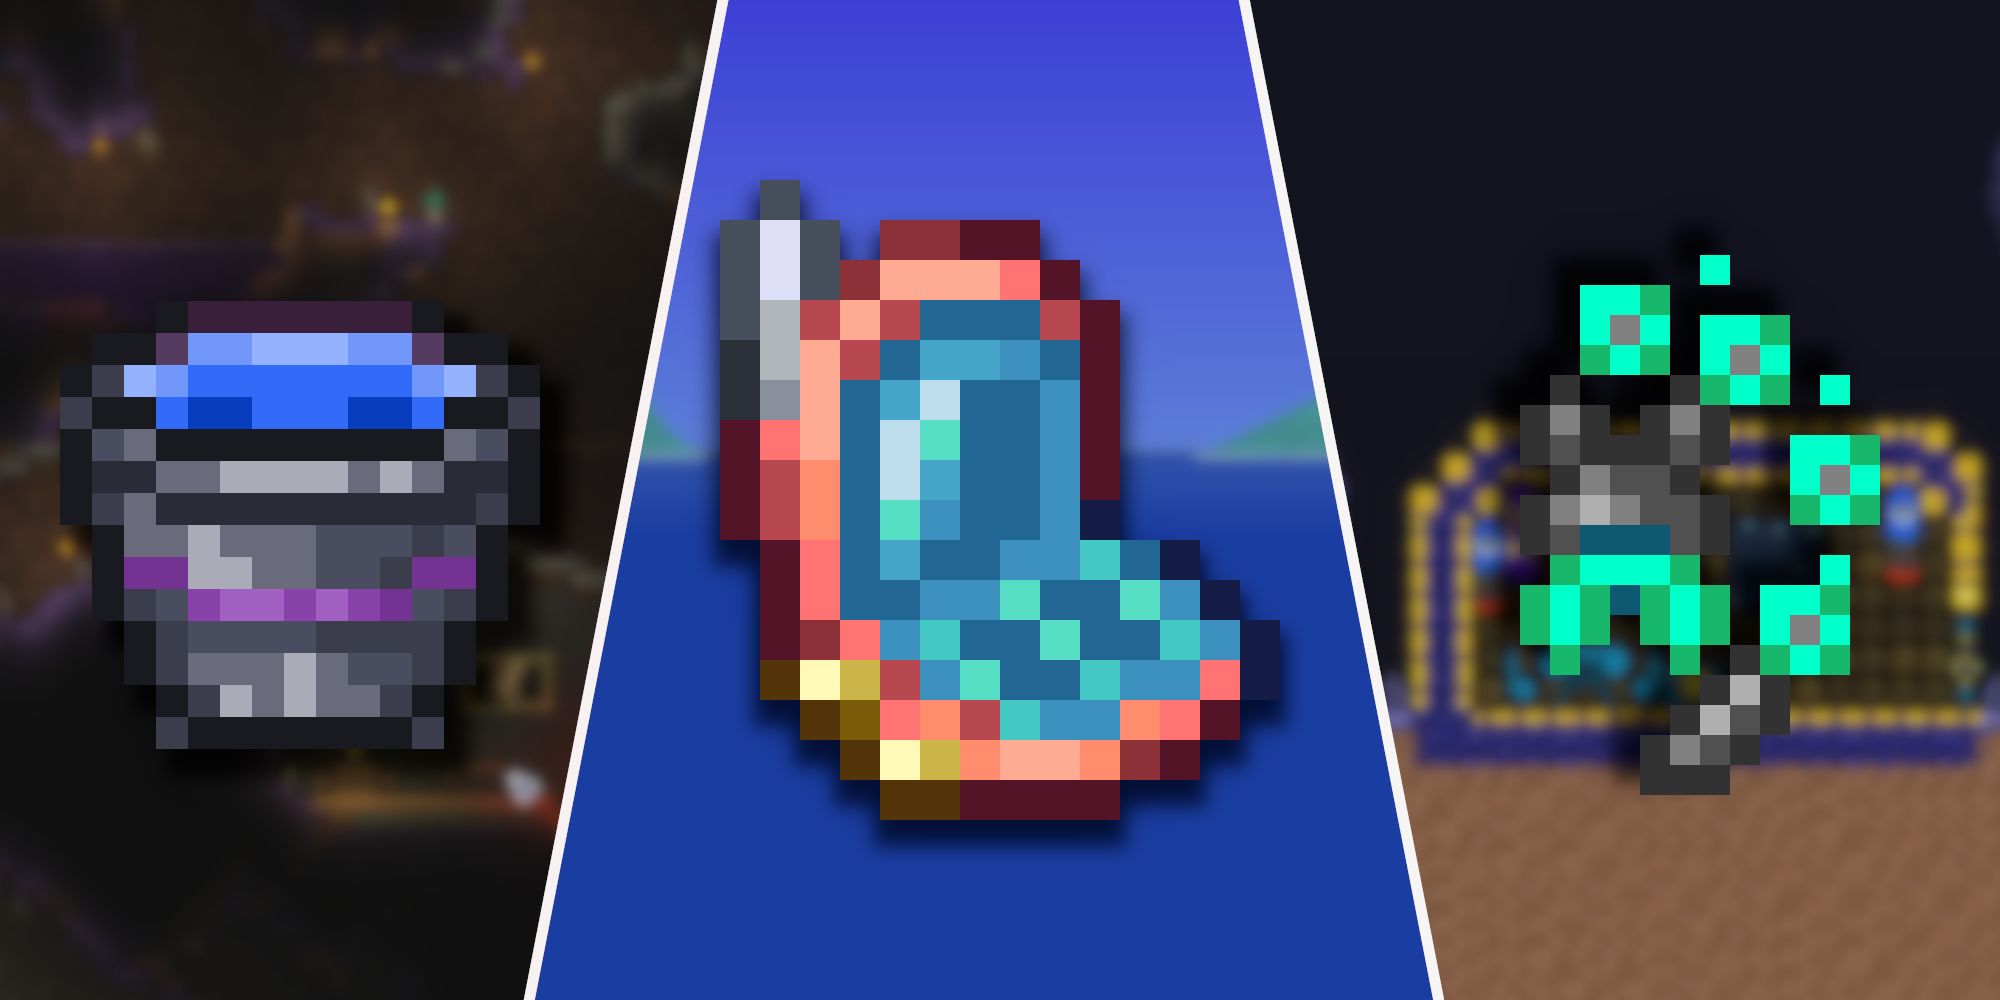 Terraria Best Tools Featured: Bottomless Bucket, Shellphone, and Anti-Gravity Hook In Front Of Blurred Backgrounds